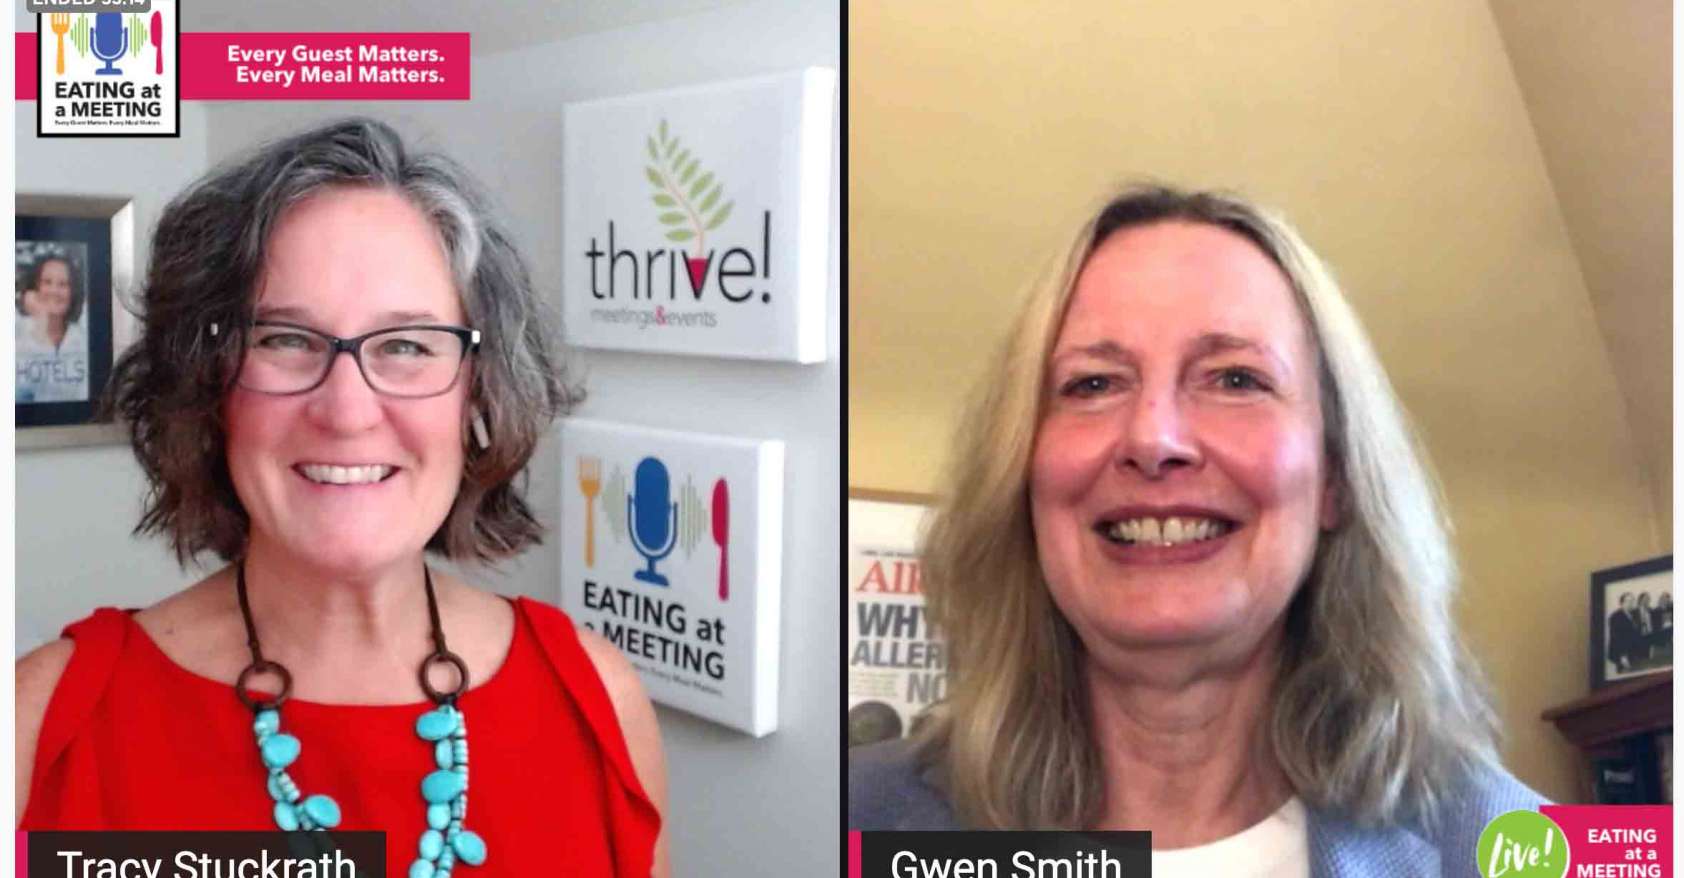 Two smiling women - Tracy Stuckrath and Gwen Smith - on video broadcast Eating at a Meeting talking about how to make the invisible visible